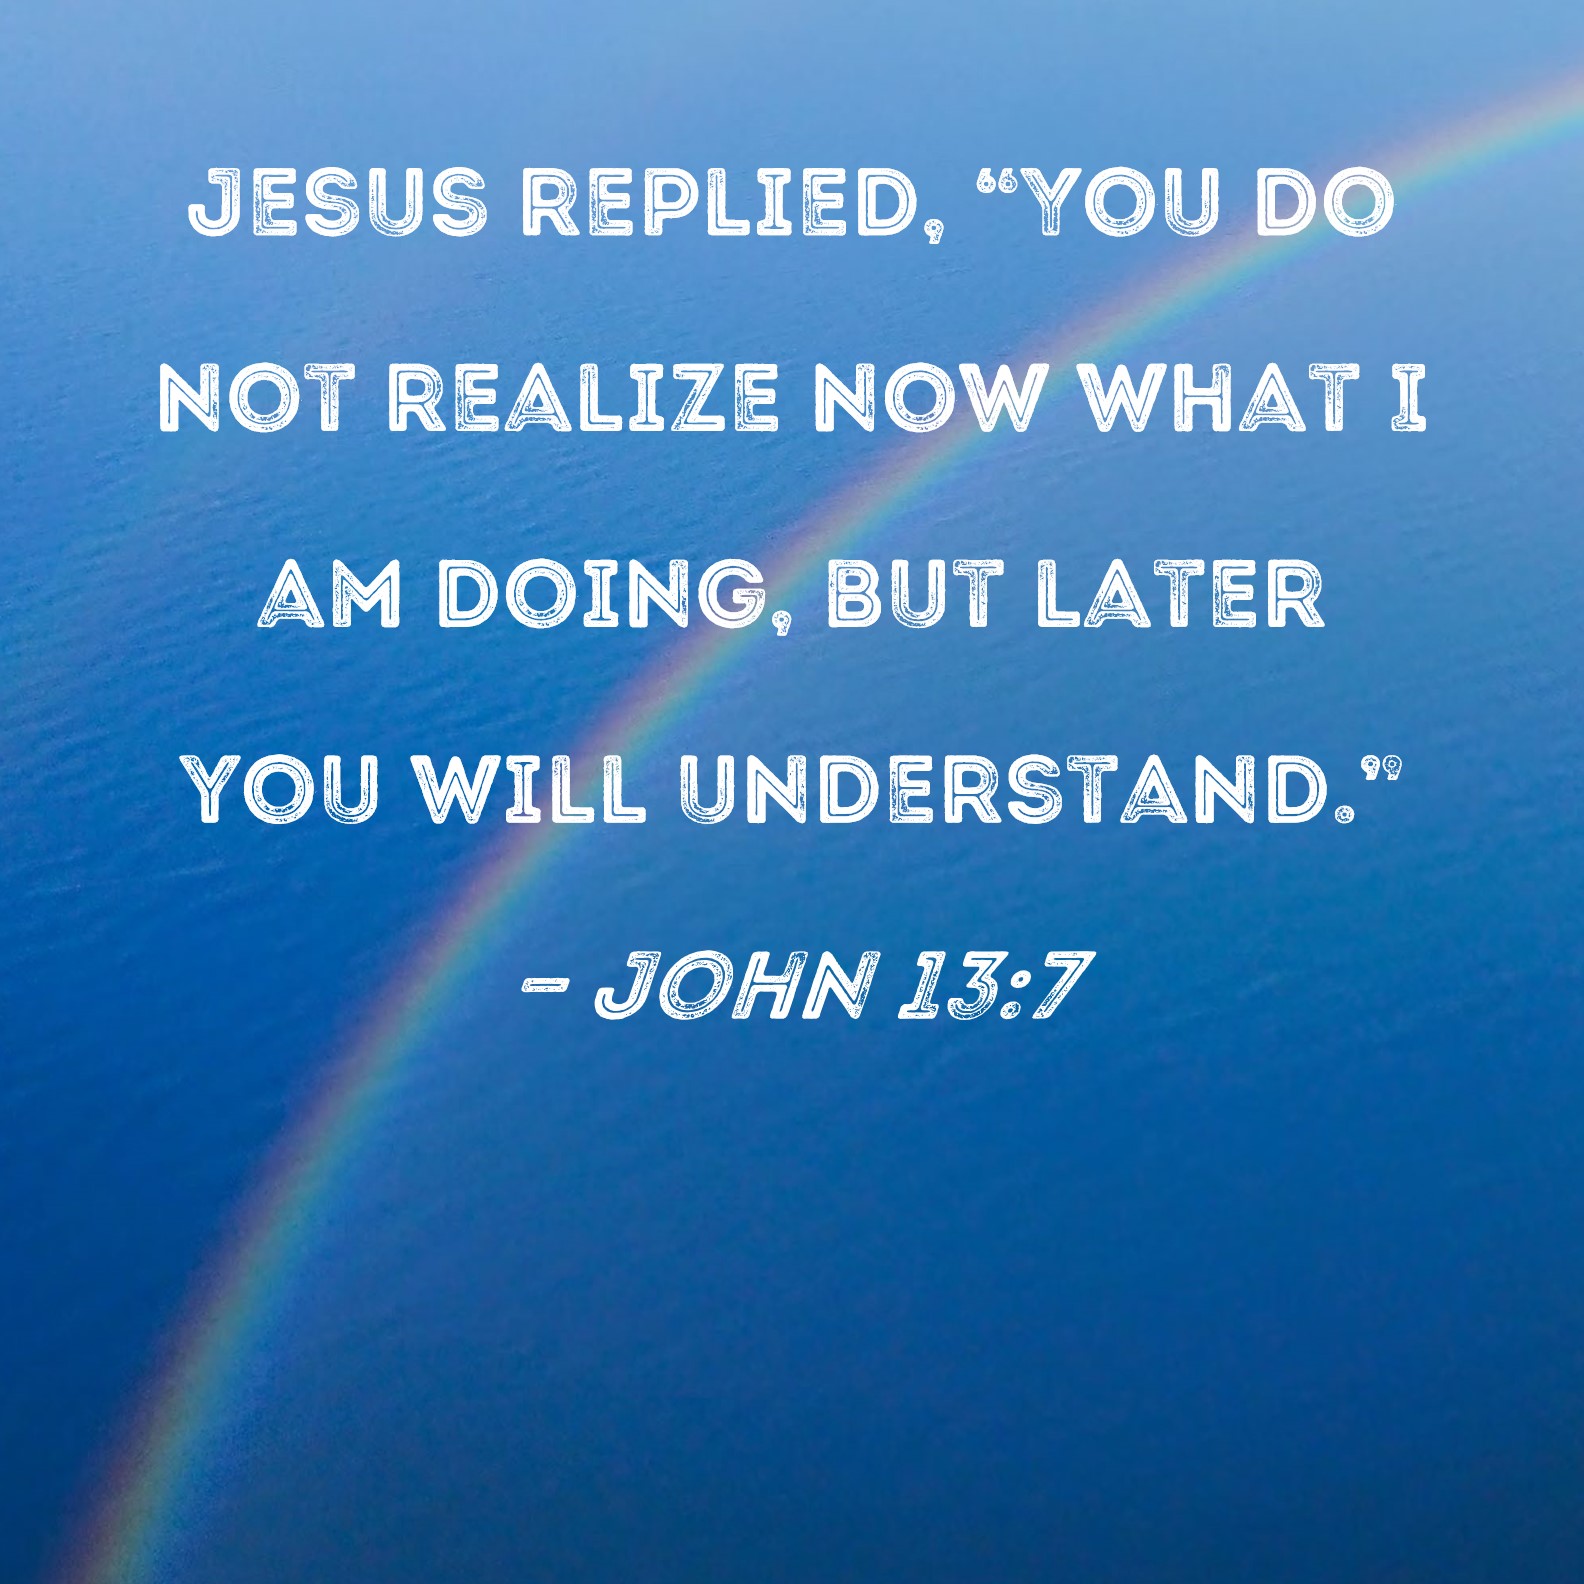 john-13-7-jesus-replied-you-do-not-realize-now-what-i-am-doing-but